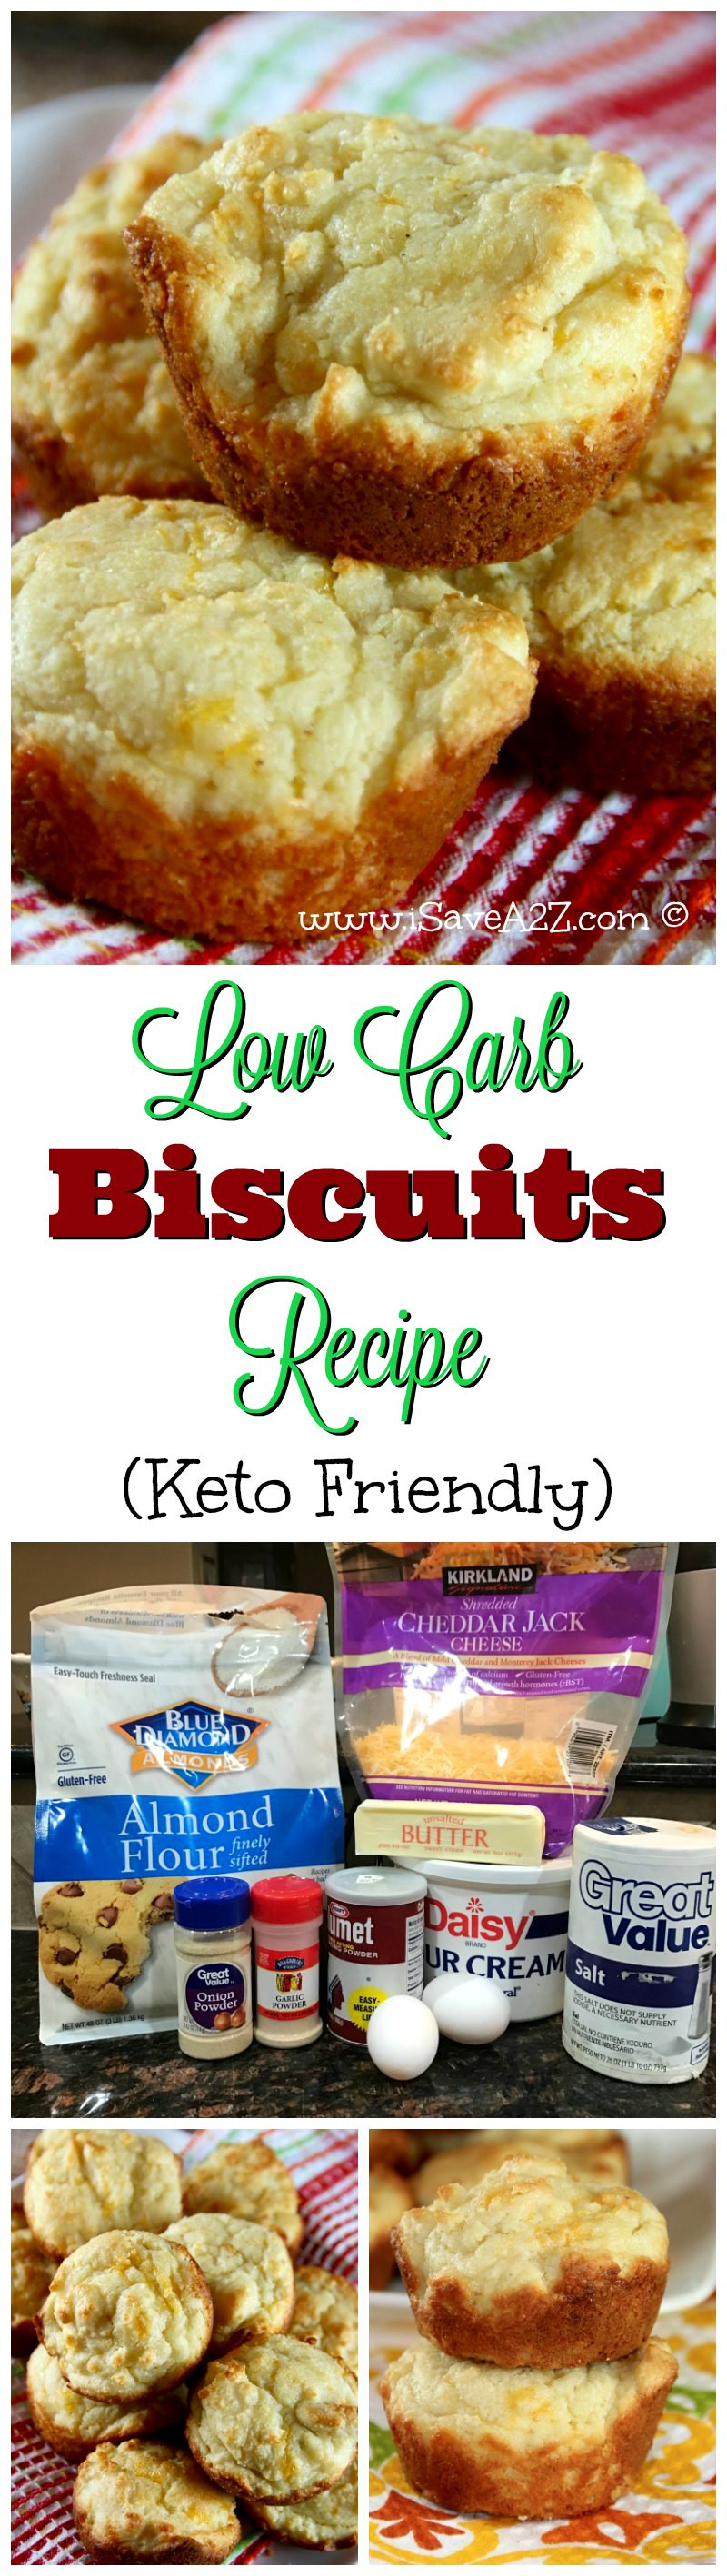 Low Carb Biscuit Recipe
 Low Carb Biscuits Recipe Keto Friendly iSaveA2Z